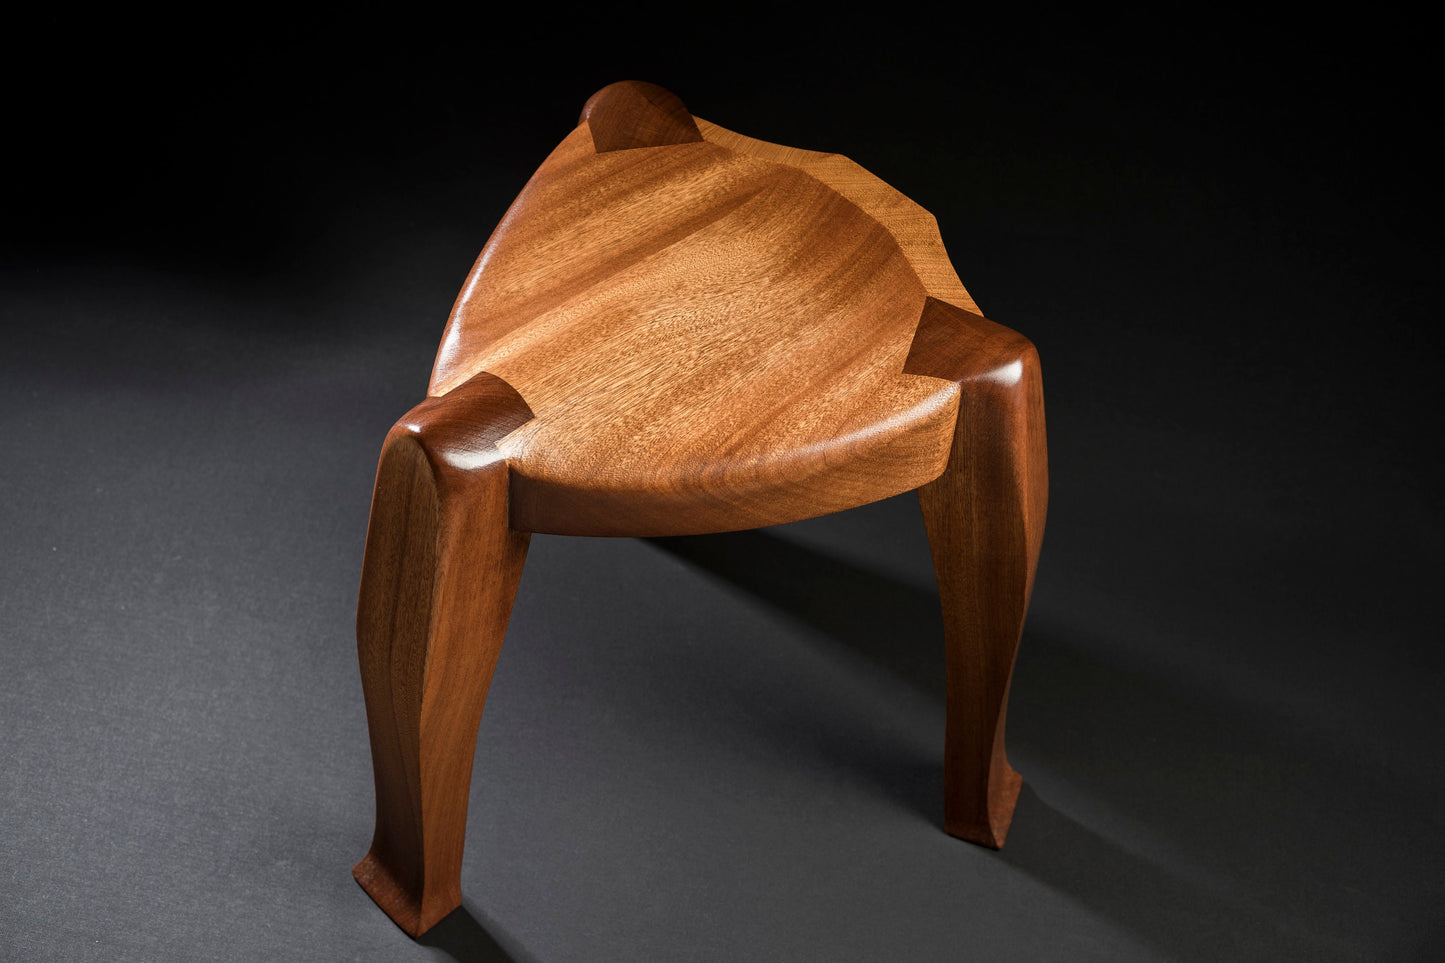 Guitar stool / piano stool - hand carved by M-ski